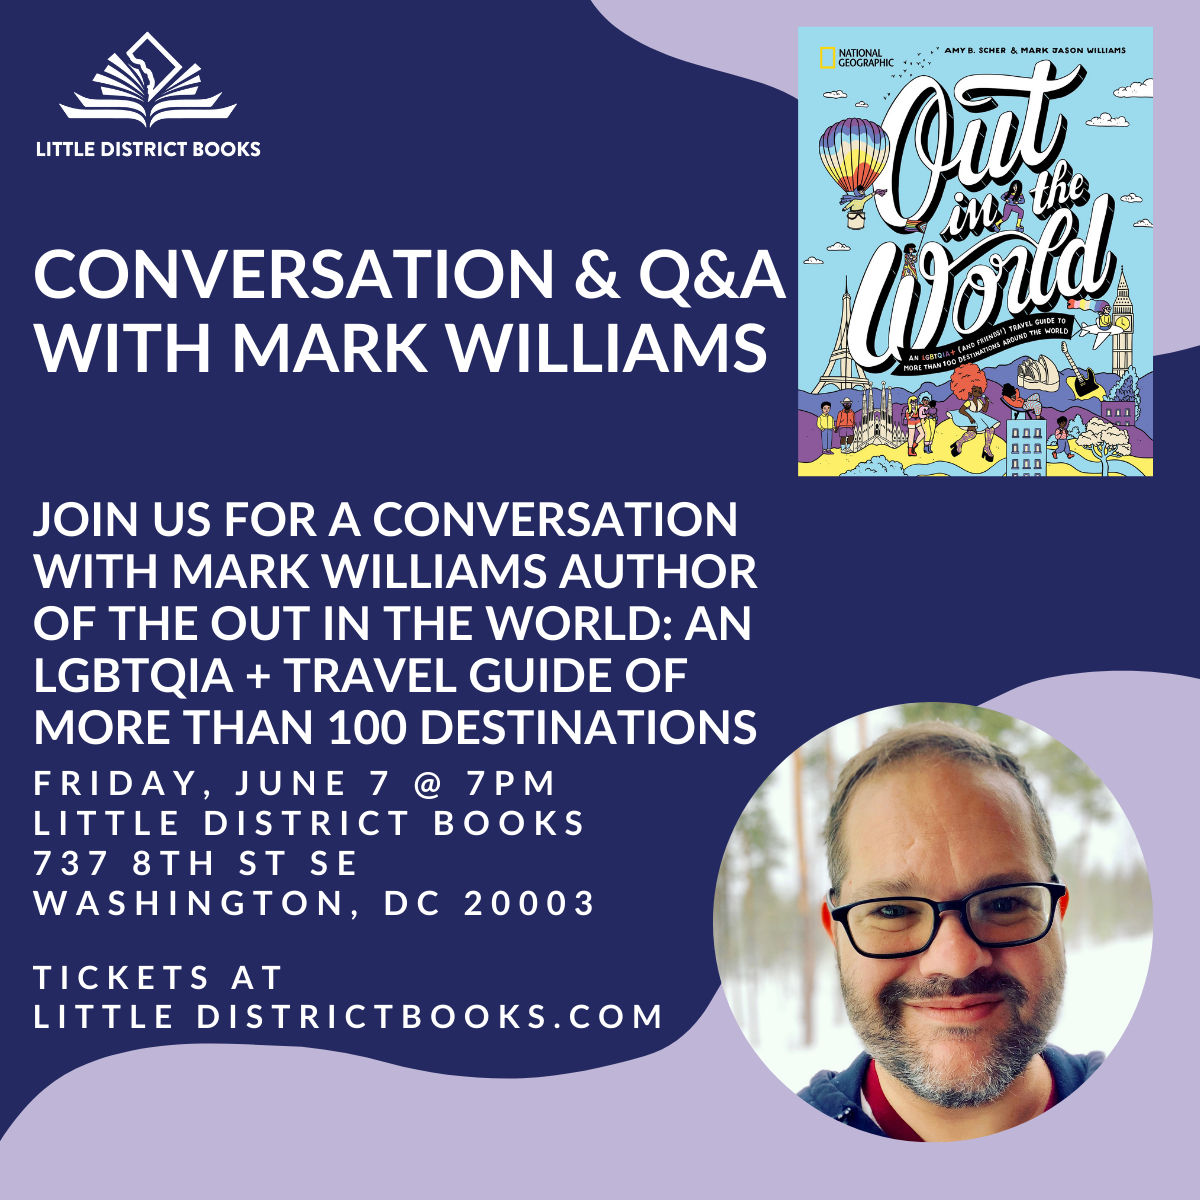 Conversation and Q&A with Mark Williams